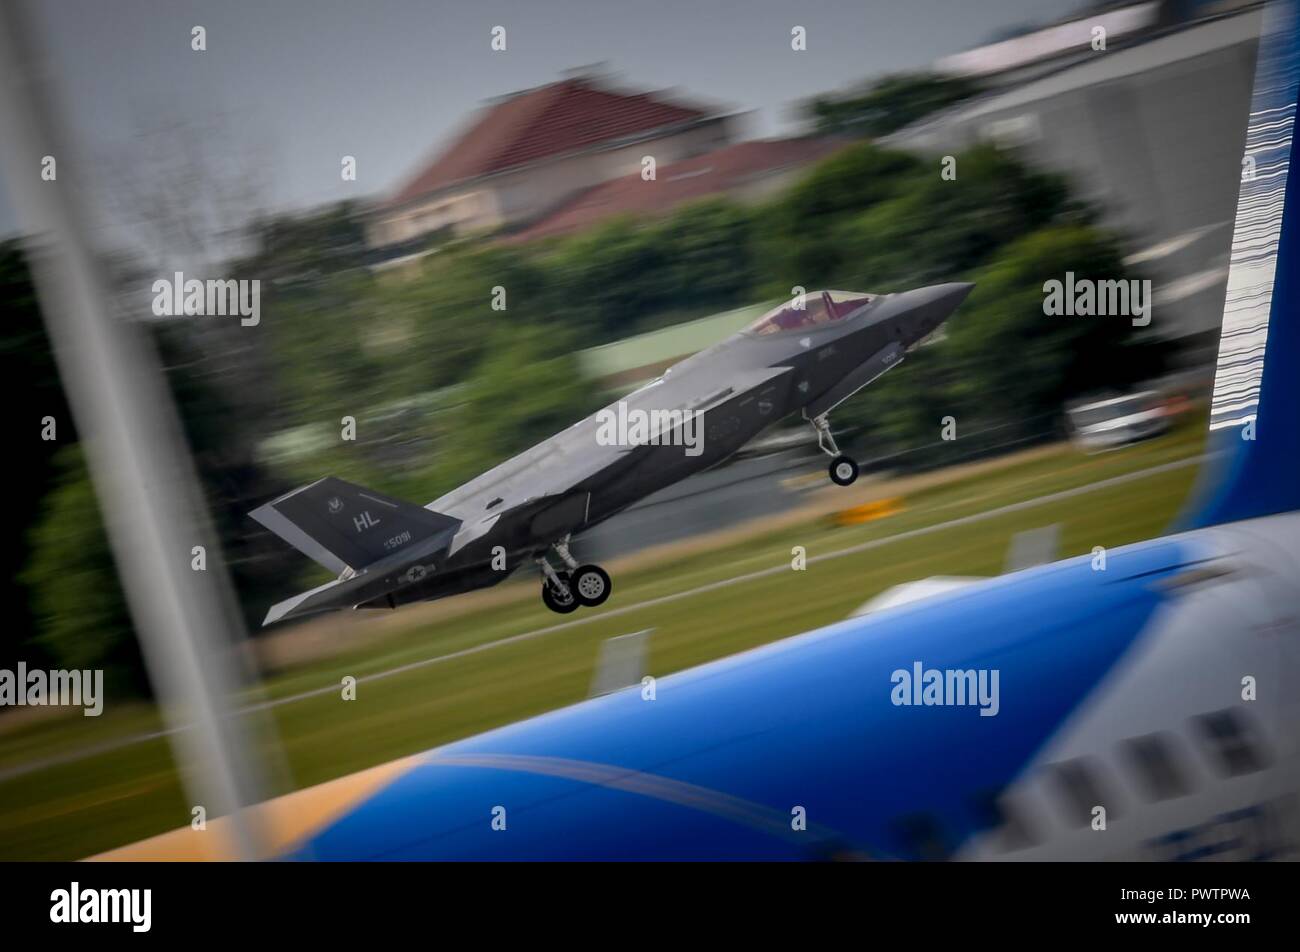 An F-35A Lightning II from Hill Air Force Base, Utah, lands after performing a flight demonstration at the Paris Air Show June 20, 2017 at Le Bourget, France. This is the first time the F-35 has performed aerial demonstrations at an international air show. Aside from the F-35, the U.S. has static displays of an F-16 Fighting Falcon, a CH-47 Chinook, an AH-64 Apache, a P-8 Poseidon, a C-130J Super Hercules and a CV-22 Osprey. The Paris Air Show offers the U.S. a unique opportunity to display their leadership in aerospeace and technology on an international scale. Stock Photo